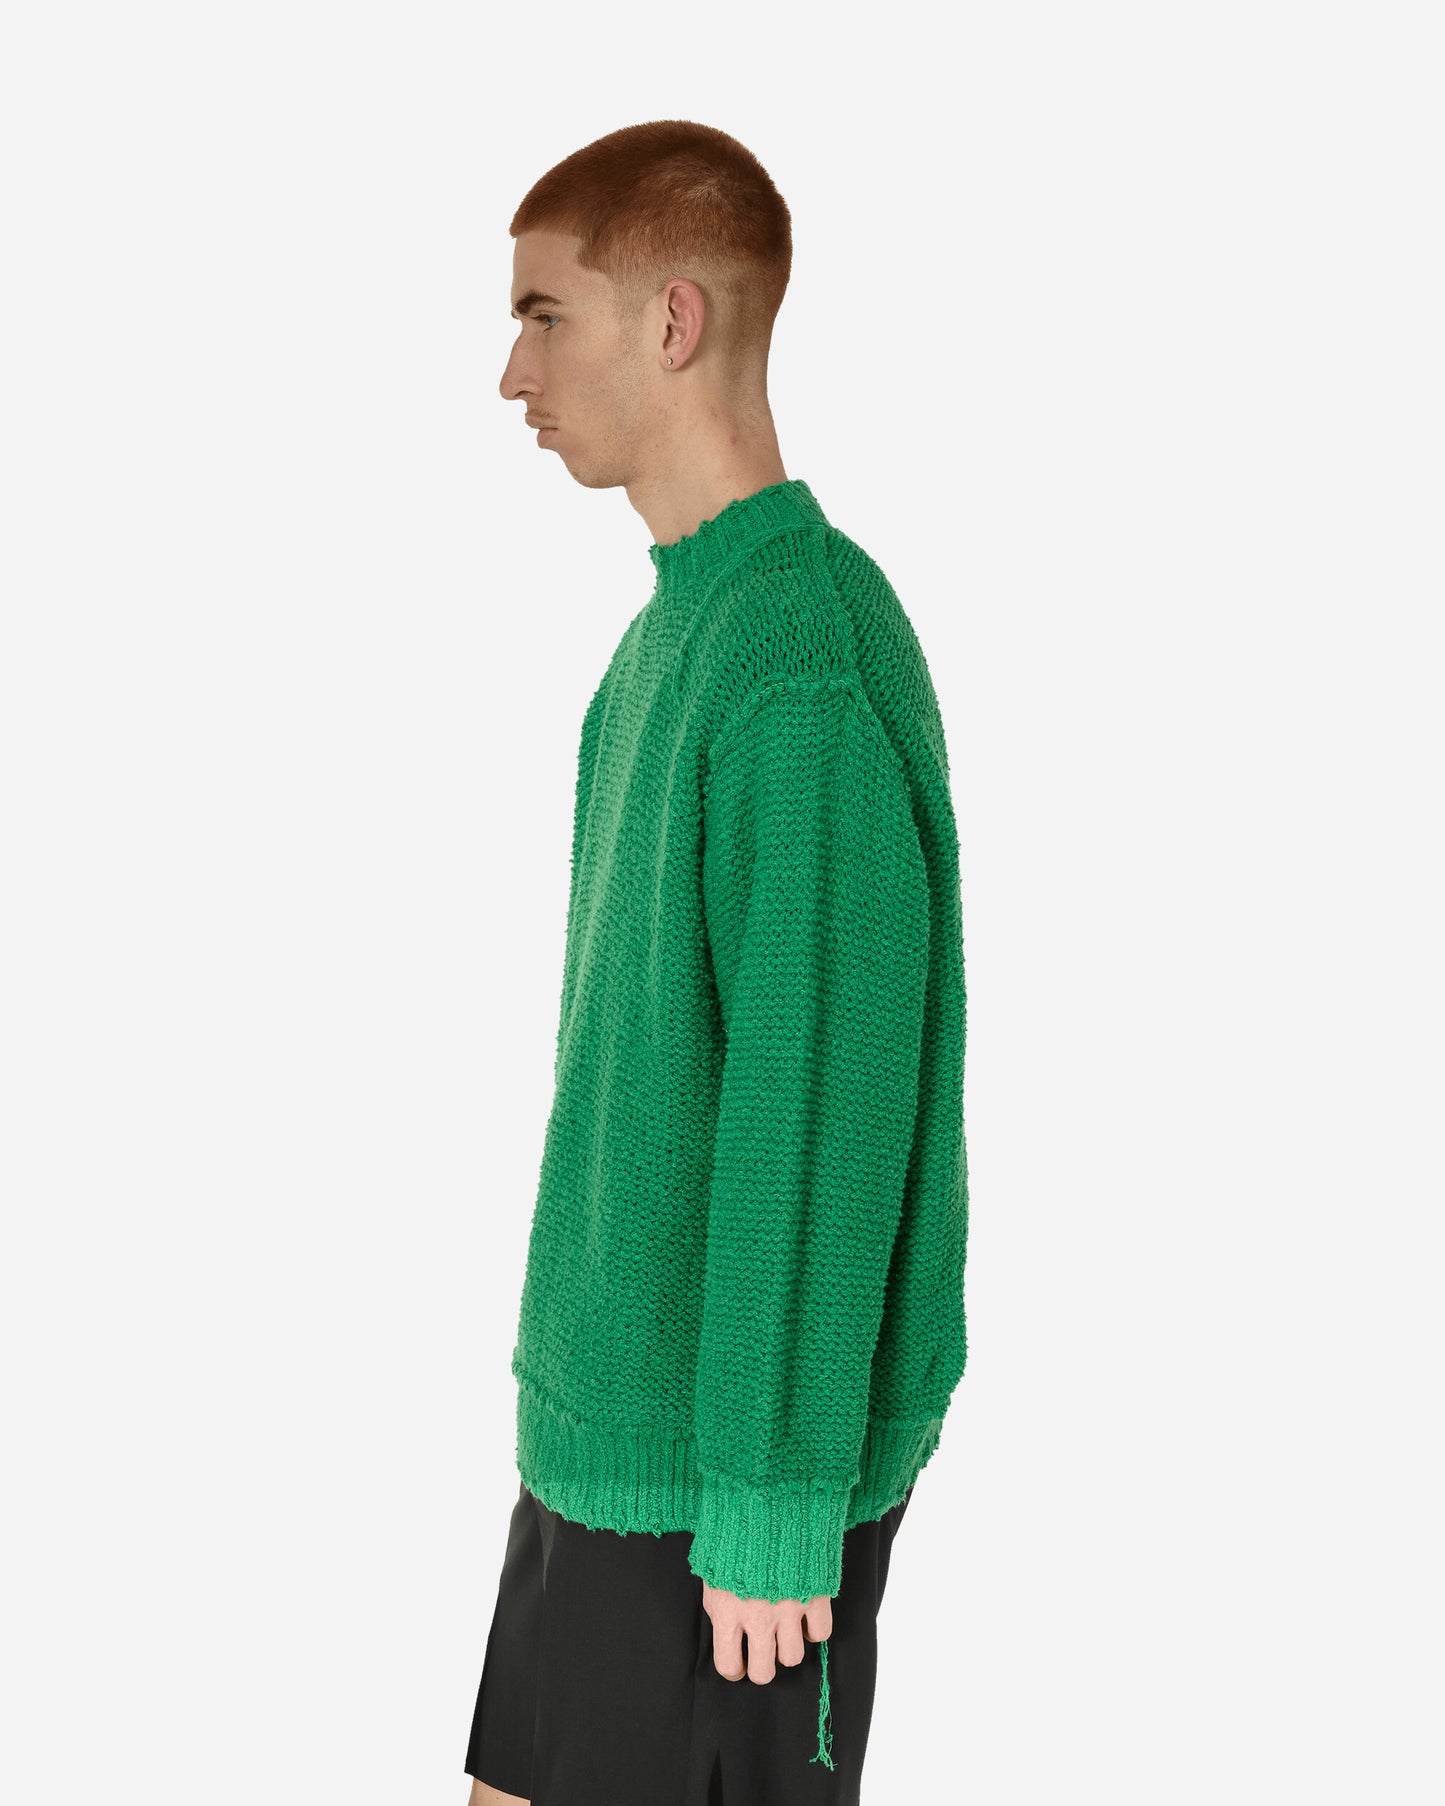 sacai Knit Pullover Green Knitwears Sweaters 24-03330M 551